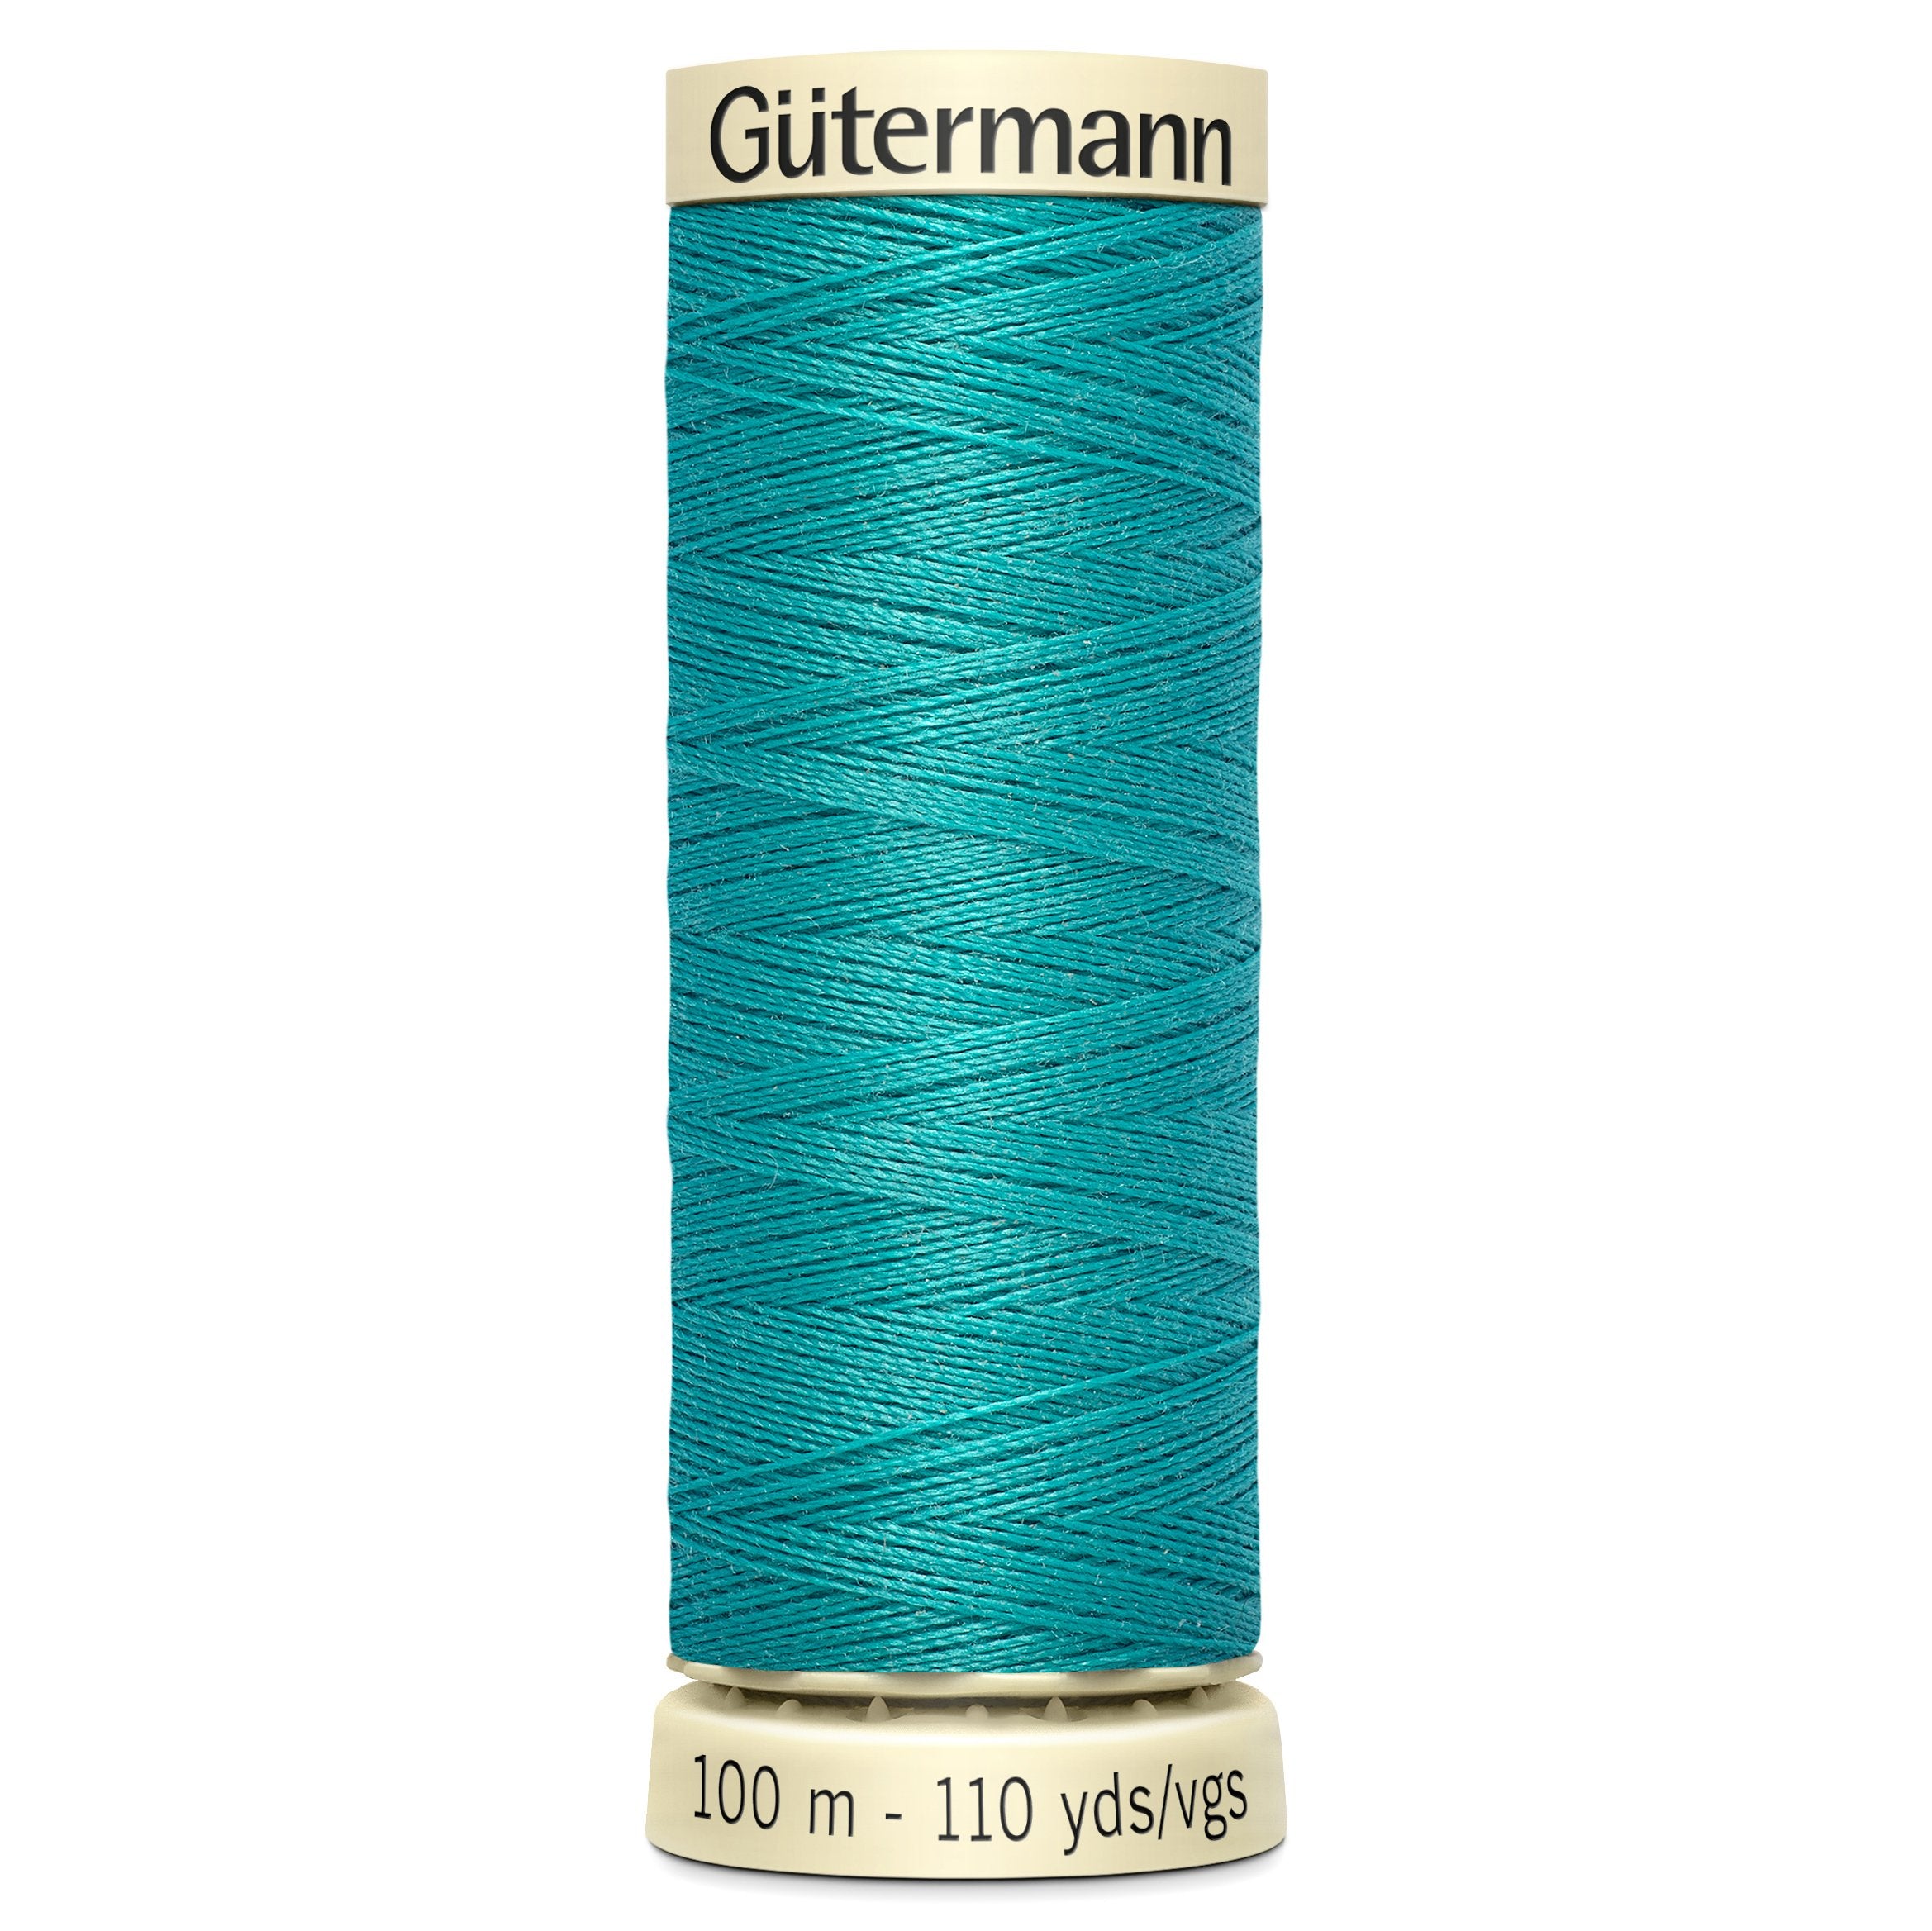 Gutermann Sew All Thread colour 763 Turquoise from Jaycotts Sewing Supplies